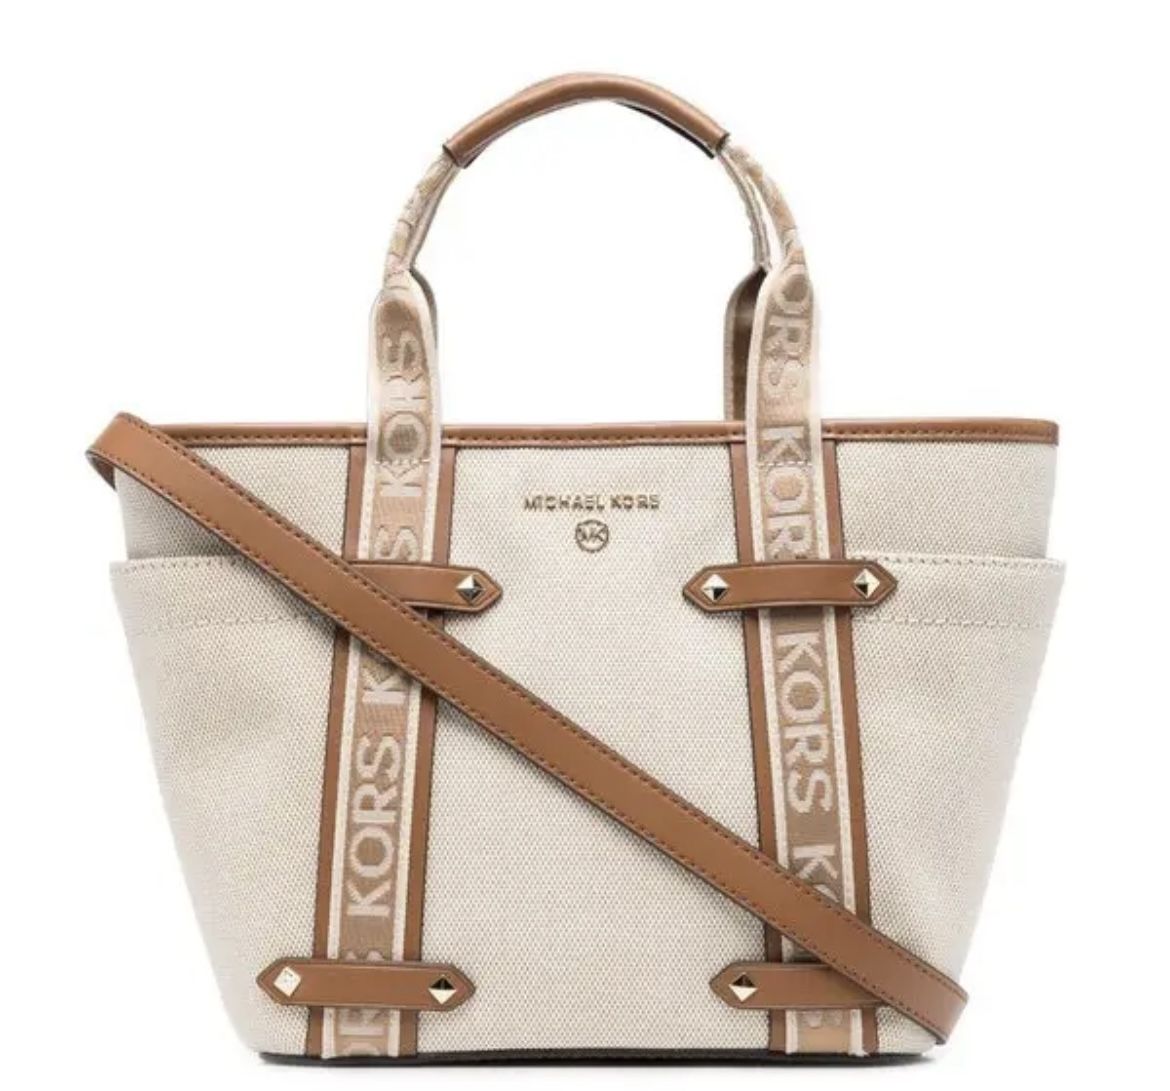 Brand new Michael Kors Maeve Convertible Tote ( size small )